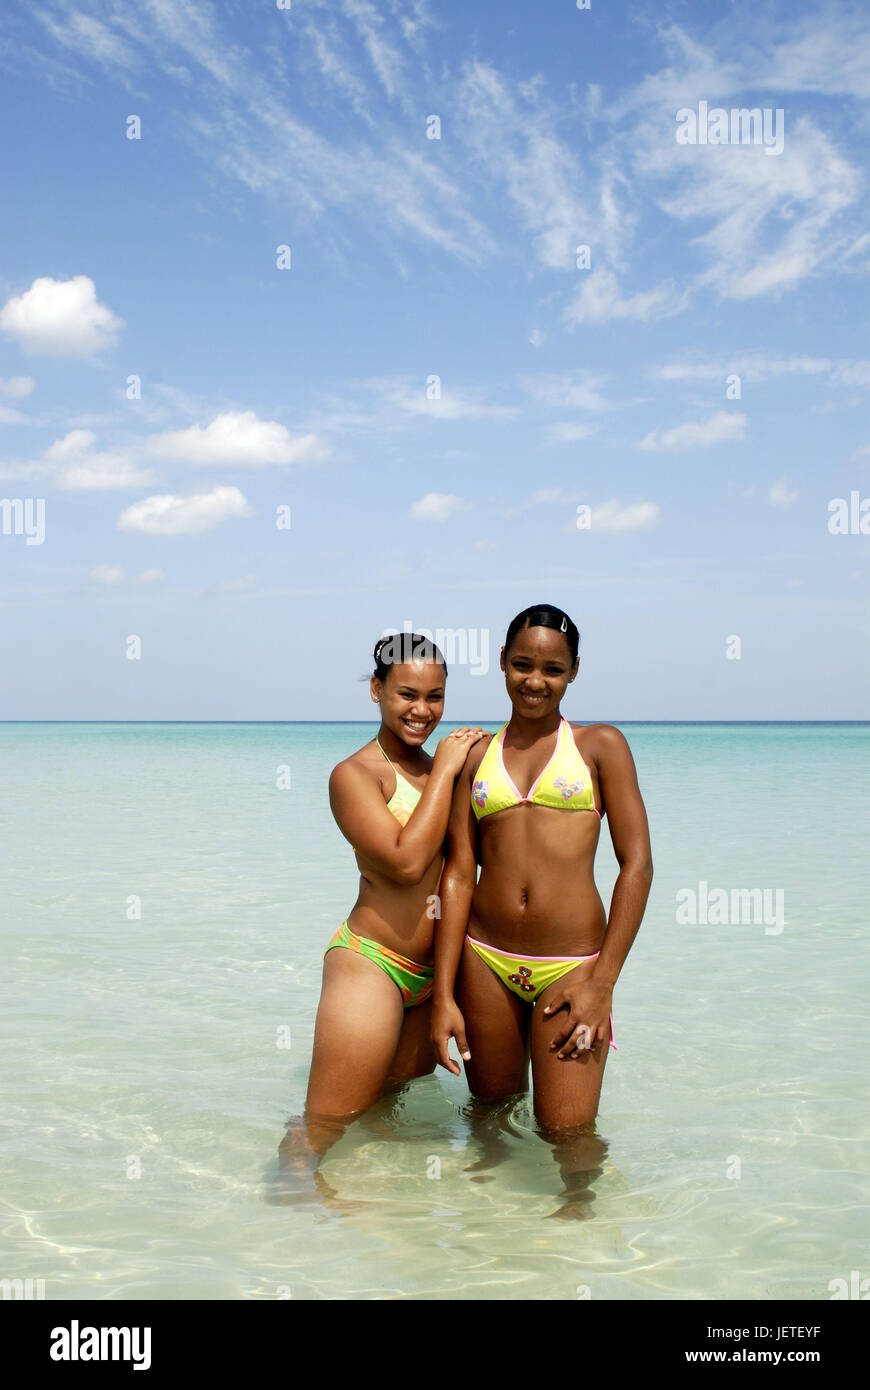 Cuba, Cubans, bikini, sea, stand, smile happily, the Caribbean, island, person, women, locals, swarthy, water, cooling, refreshment, friendly, friendship, friends, leisure time, bath pass, cloudy sky, Stock Photo